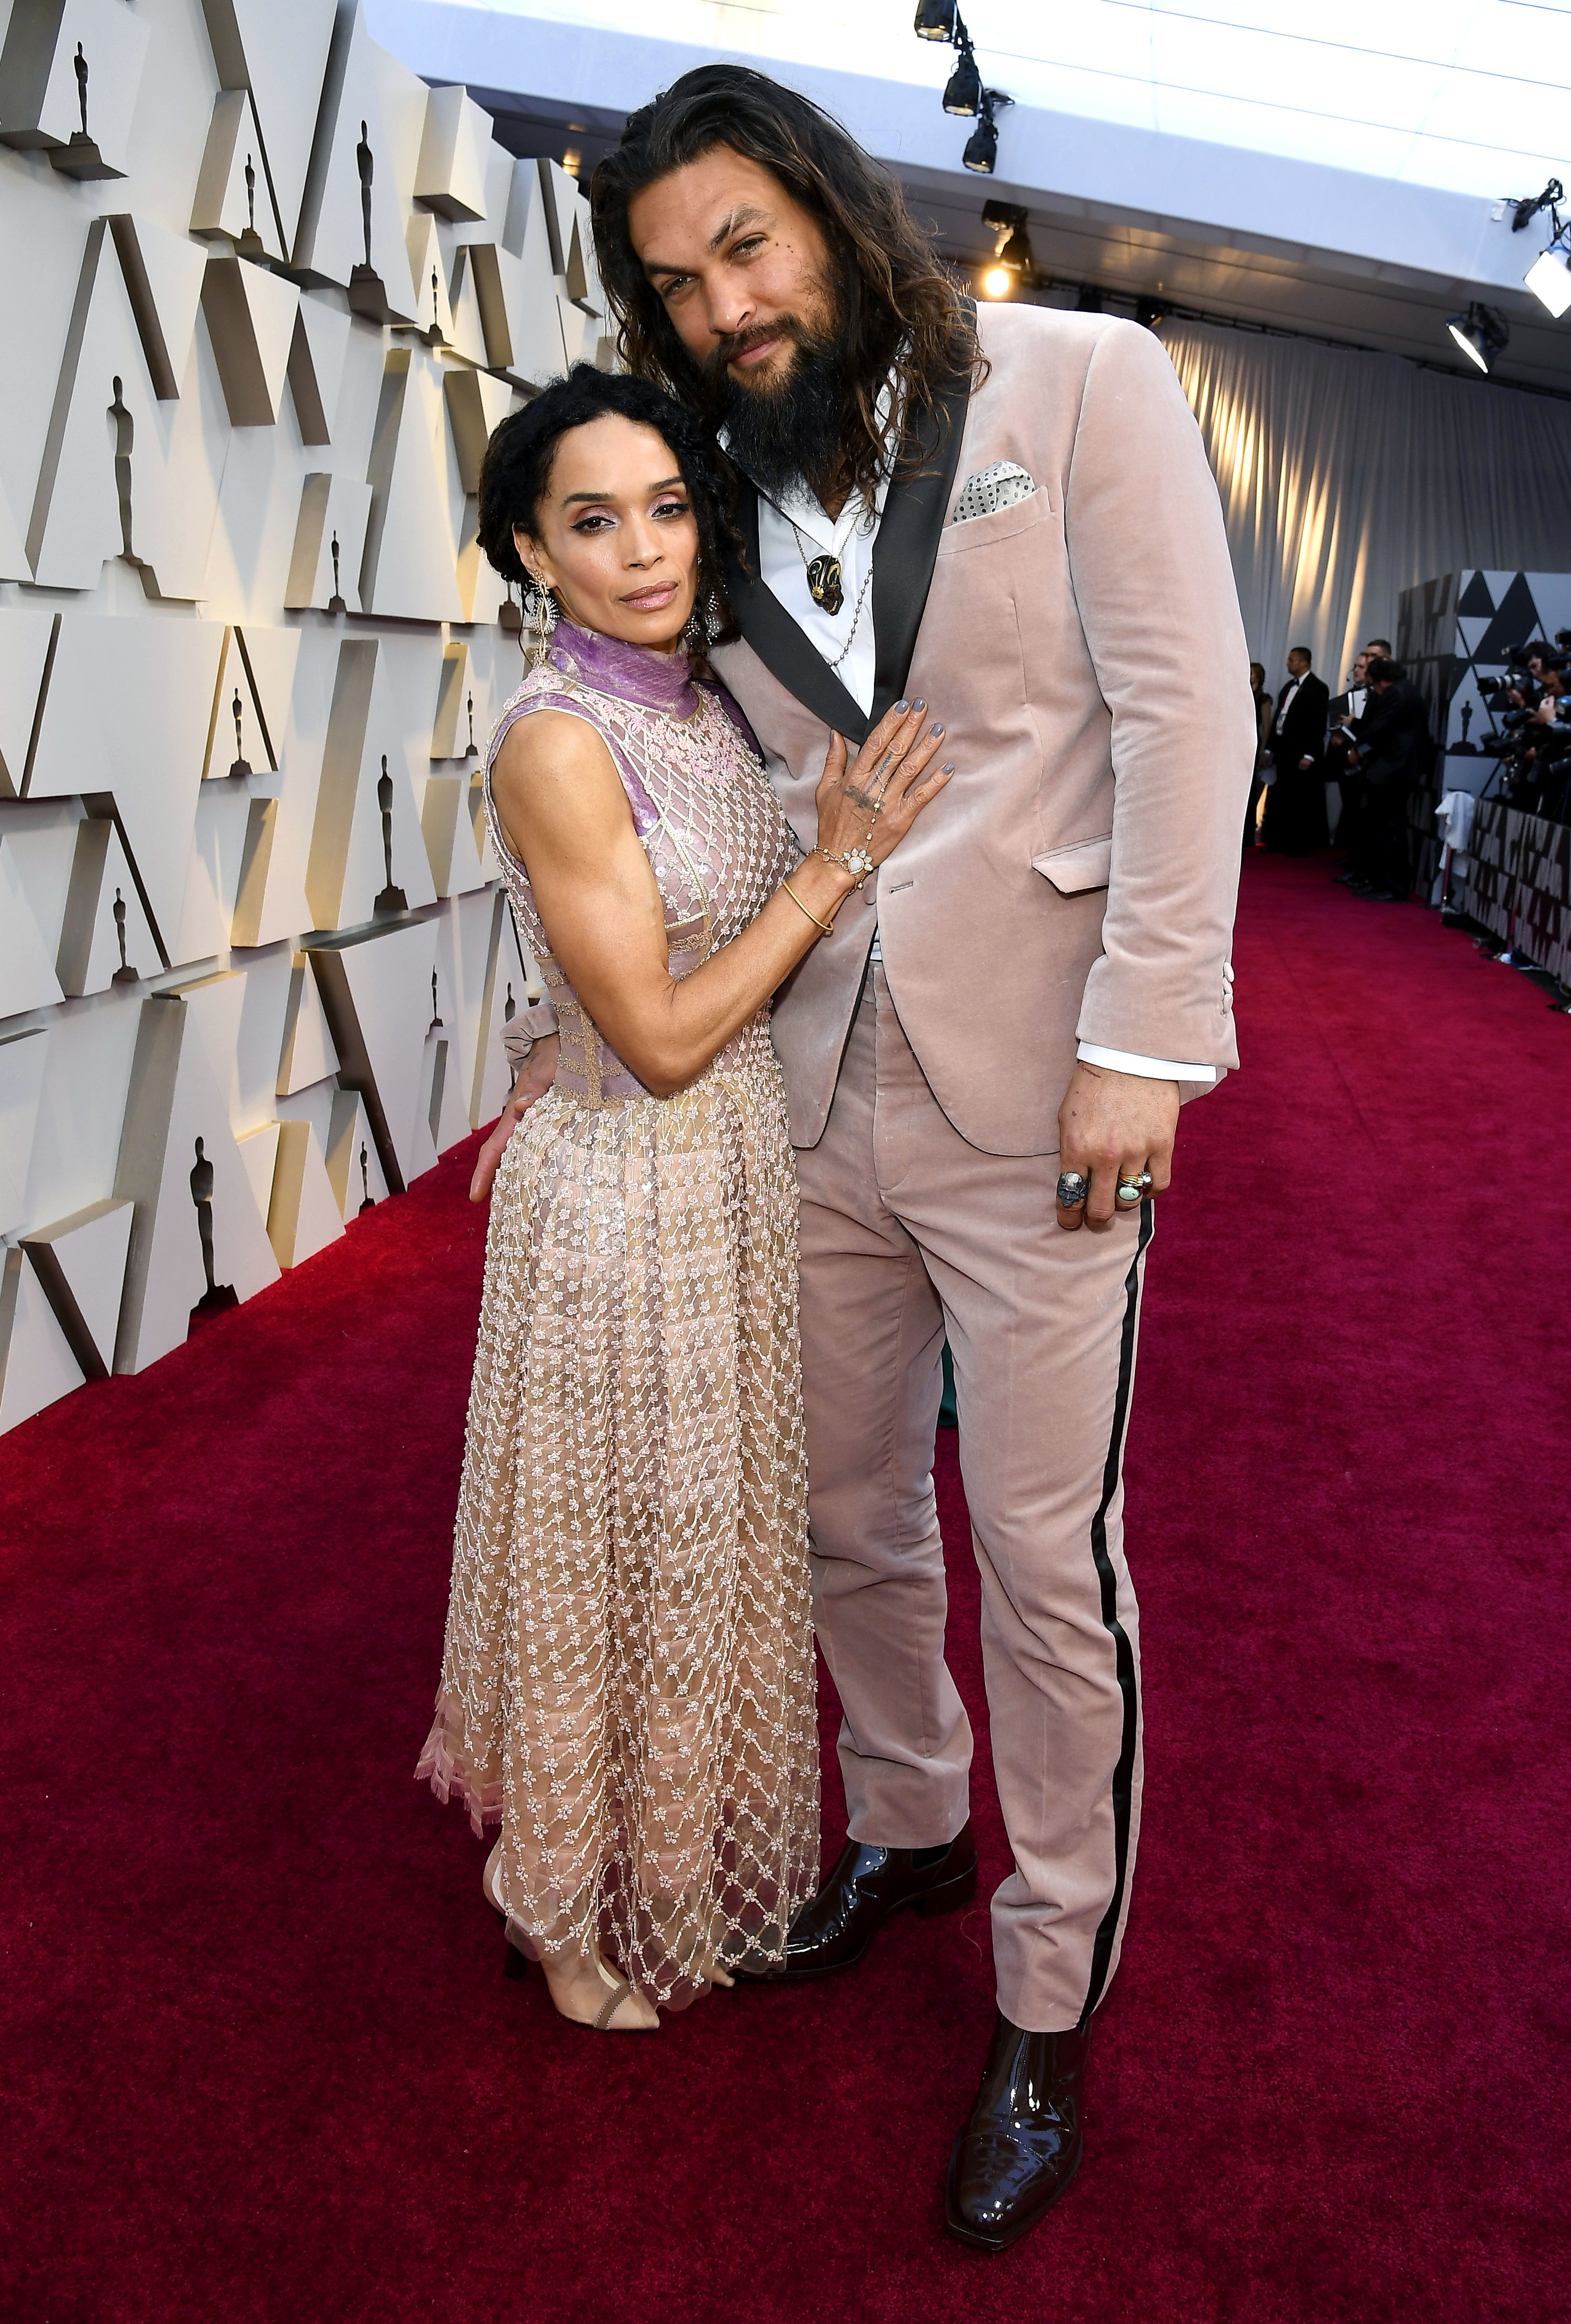 at the 2019 academy awards